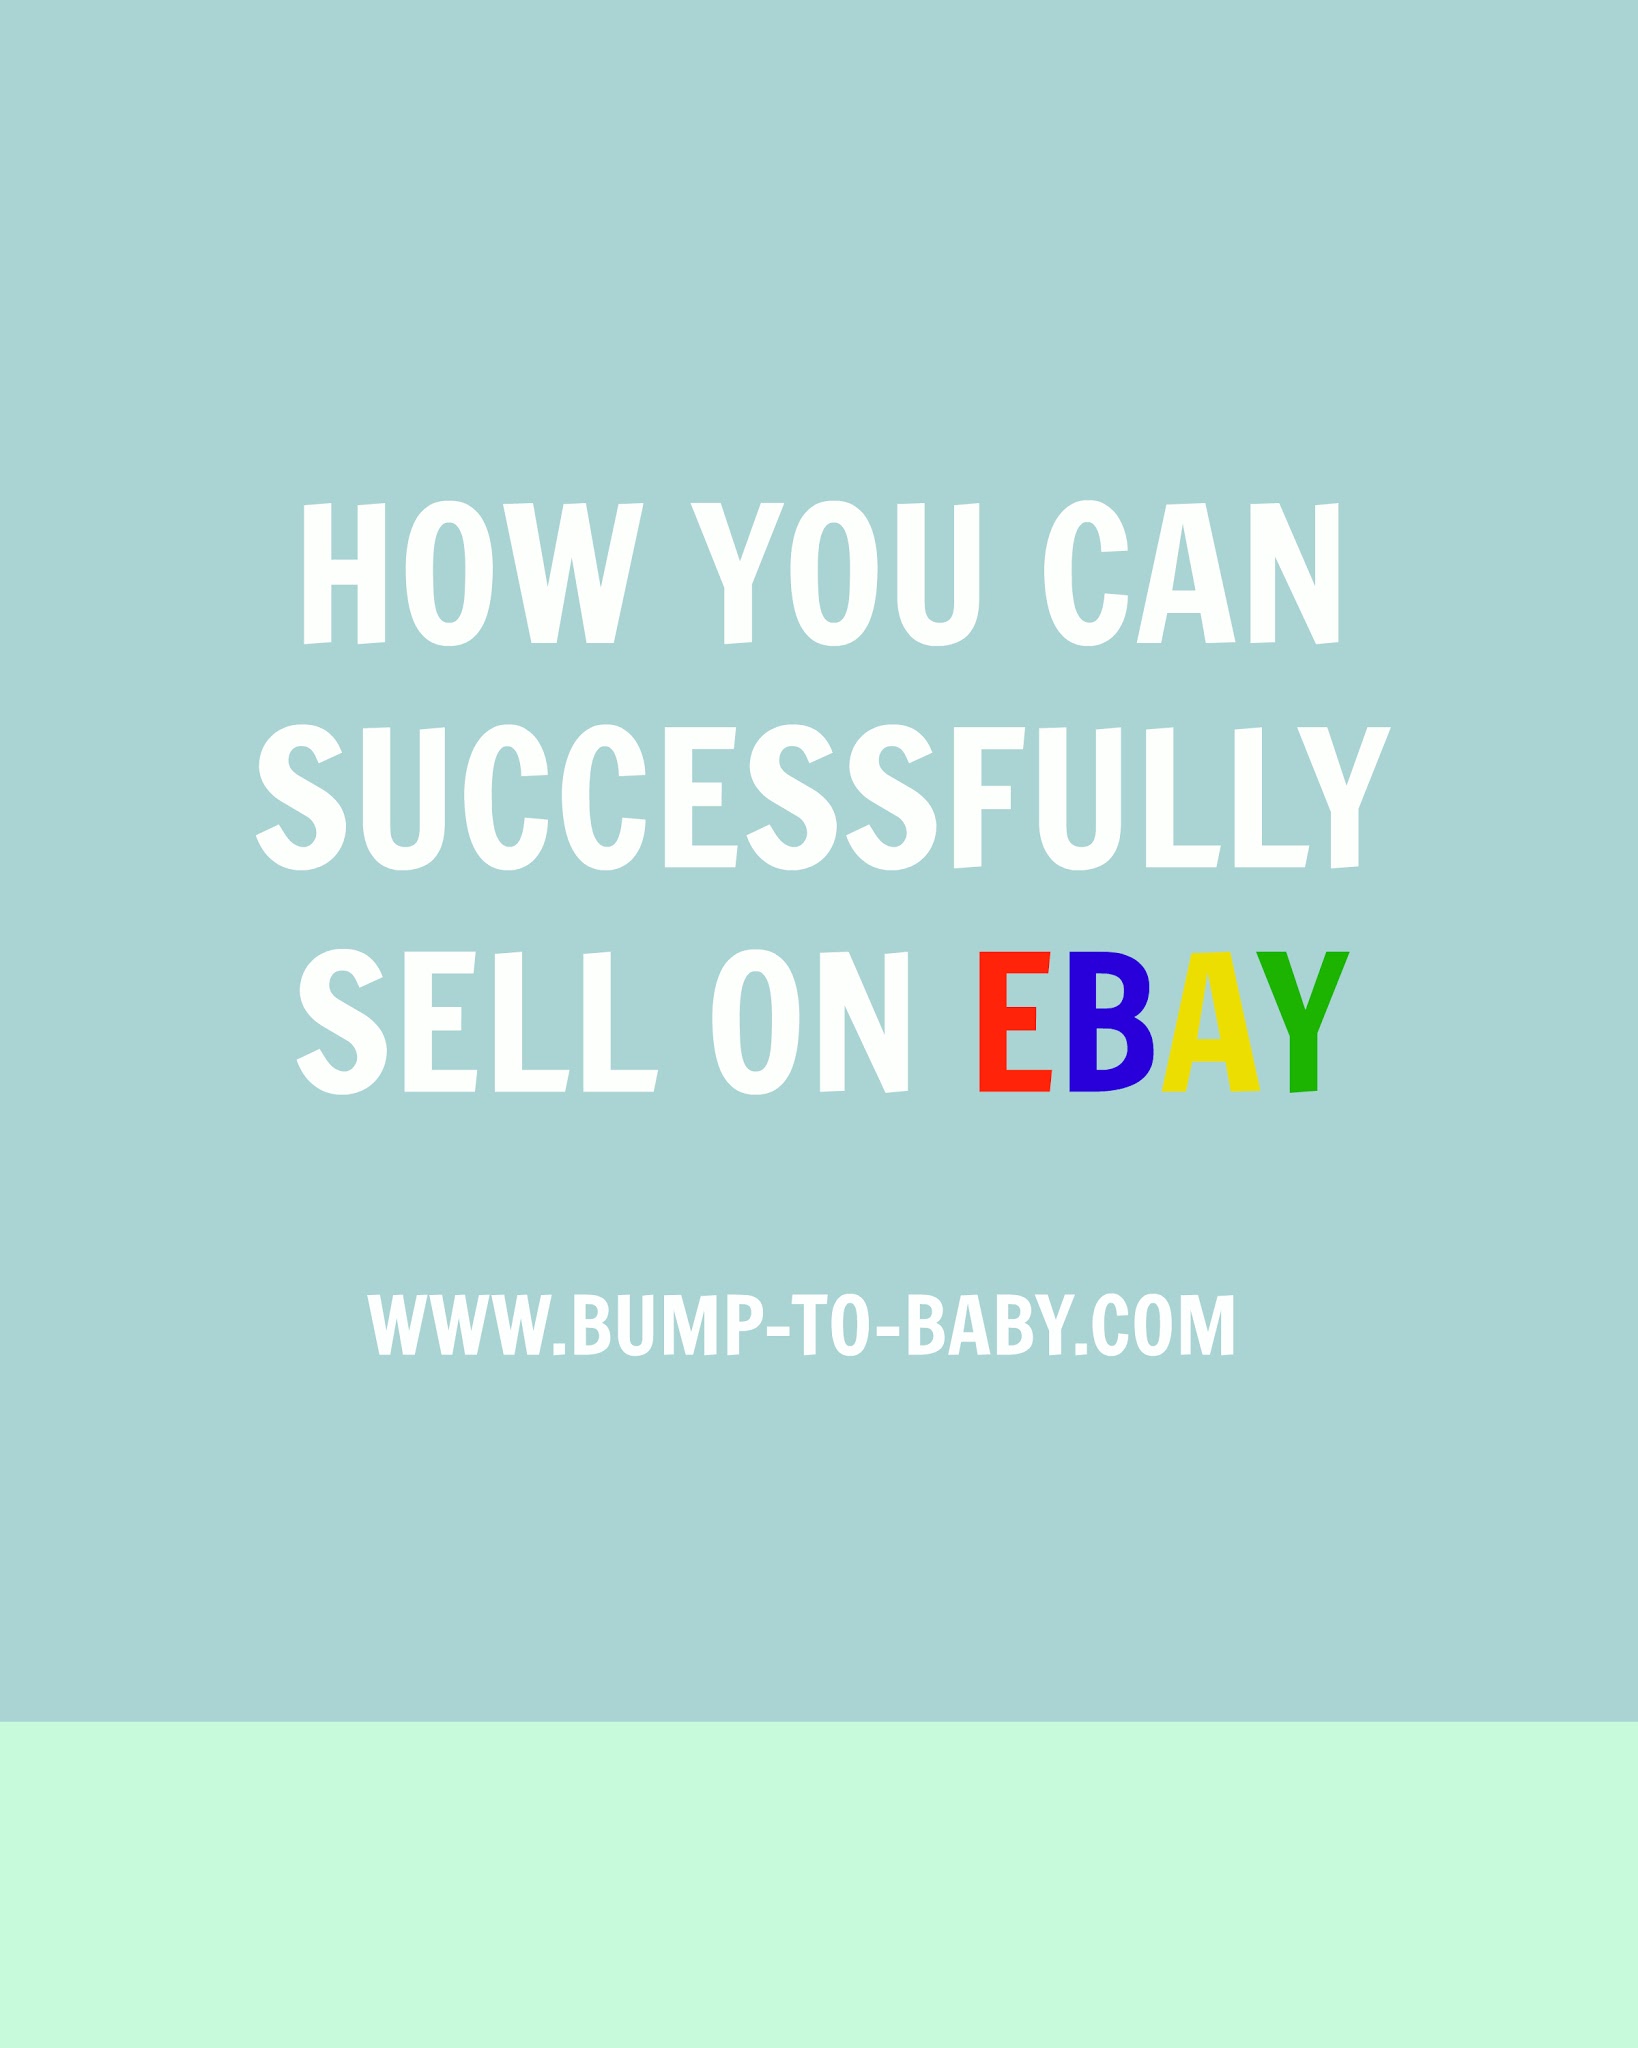 How to Successfully Sell on eBay